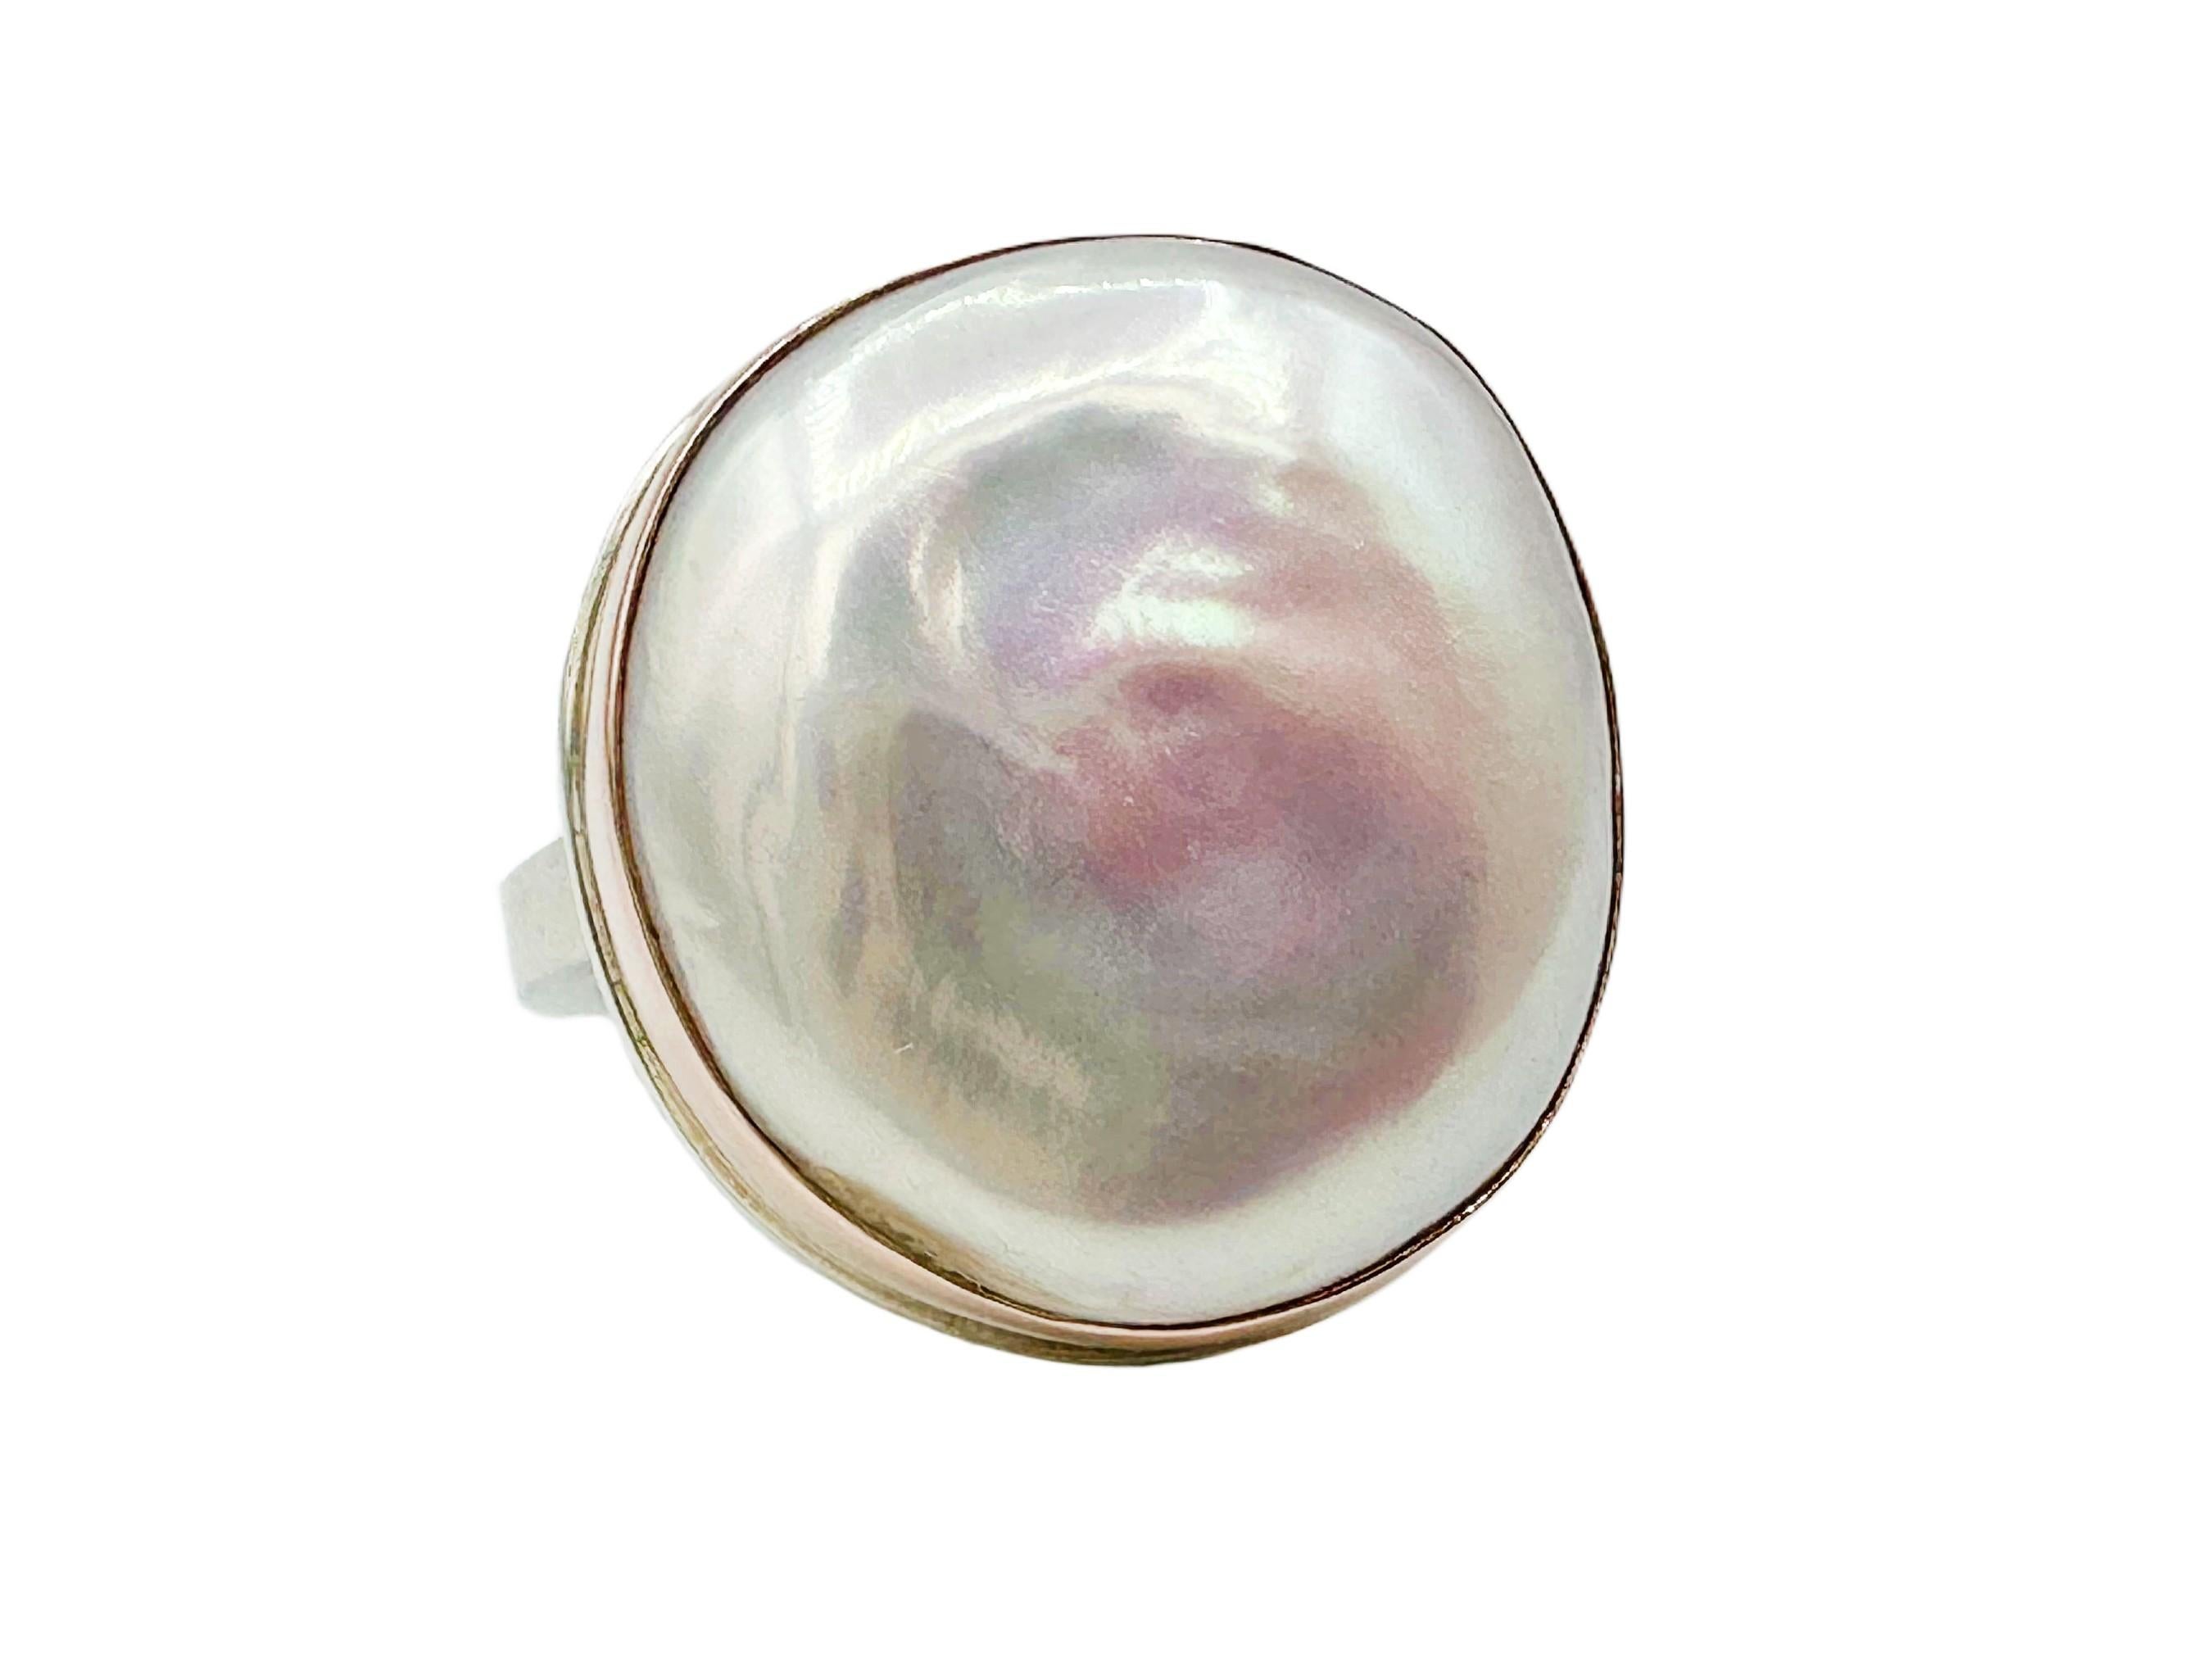 Gorgeous Jamie Joseph designer ring featuring a blush pink cultured pearl set into a 14k rose gold bezel atop a sterling silver platform and band. The pearl has a lustrous sheen and an organic shape reminiscent of dollops of cloud. The pearl has a